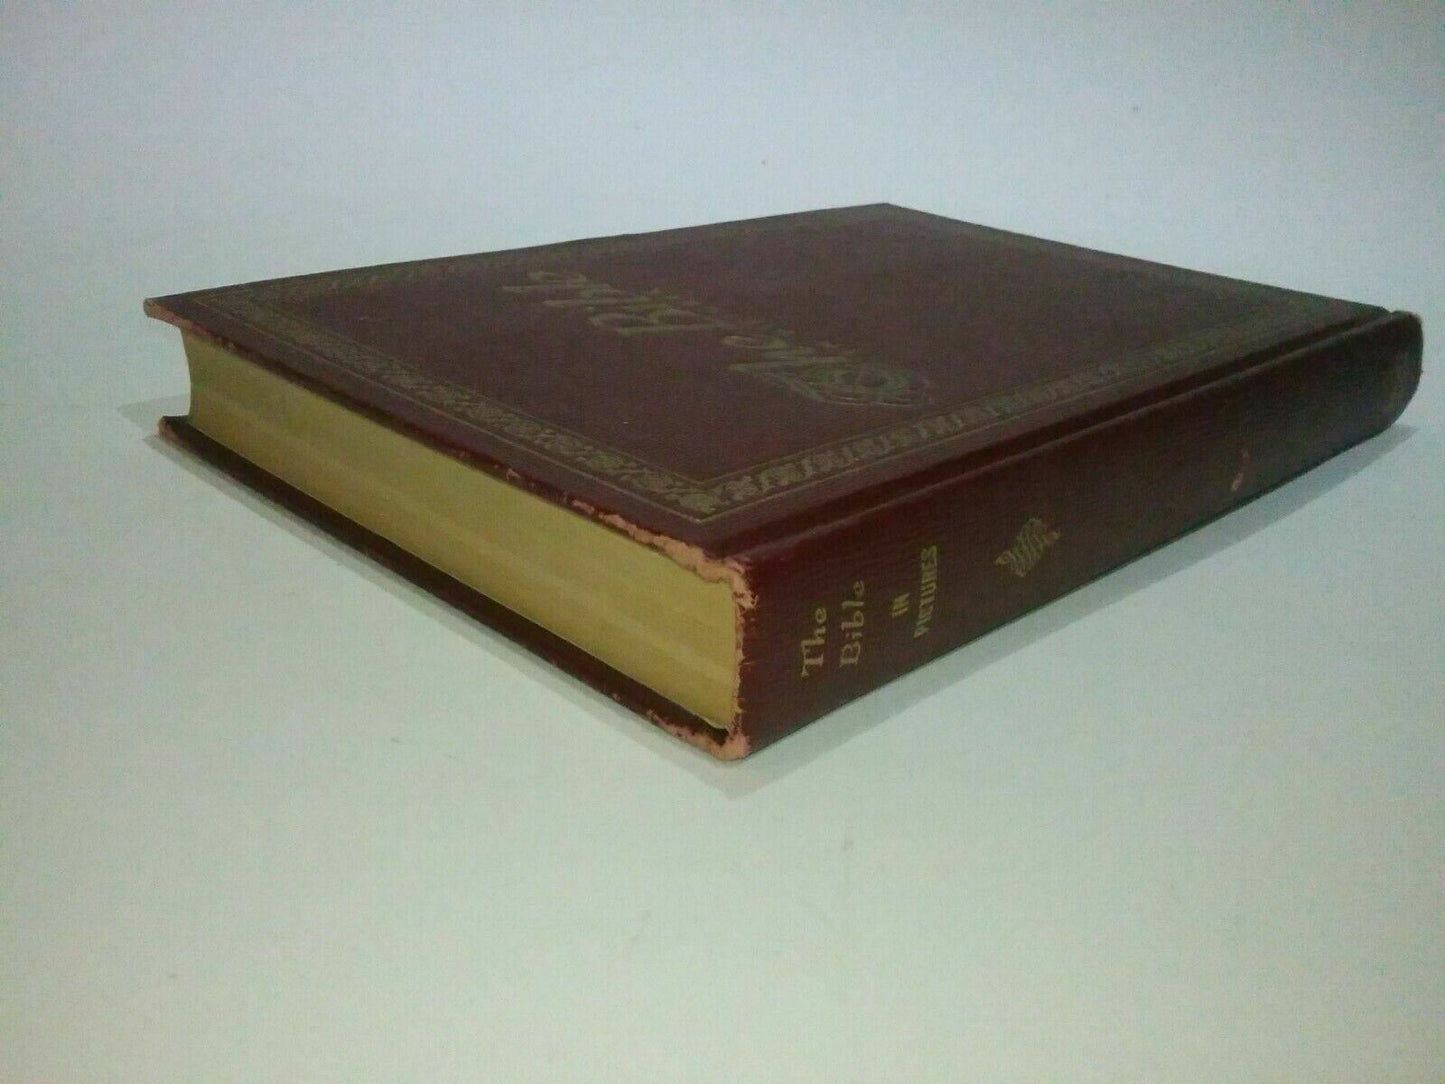 The Bible in Pictures 1952 Ralph Kirby Greystone Press Presentation Edition